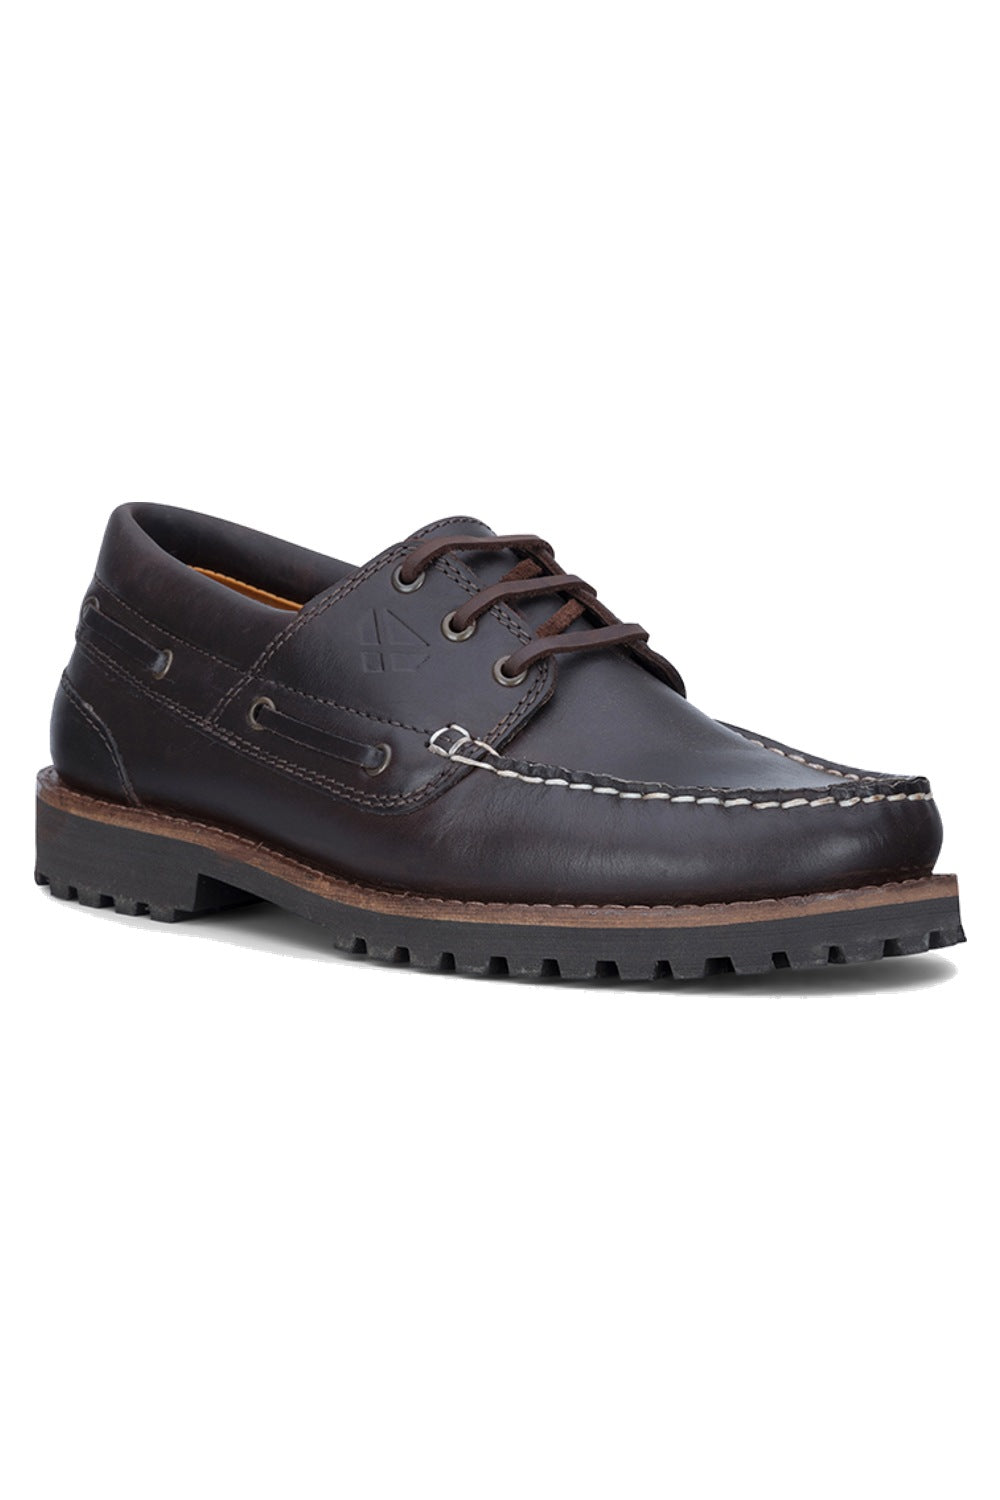 Hoggs of Fife Kintyre Rugged Moccasin Boat Shoe